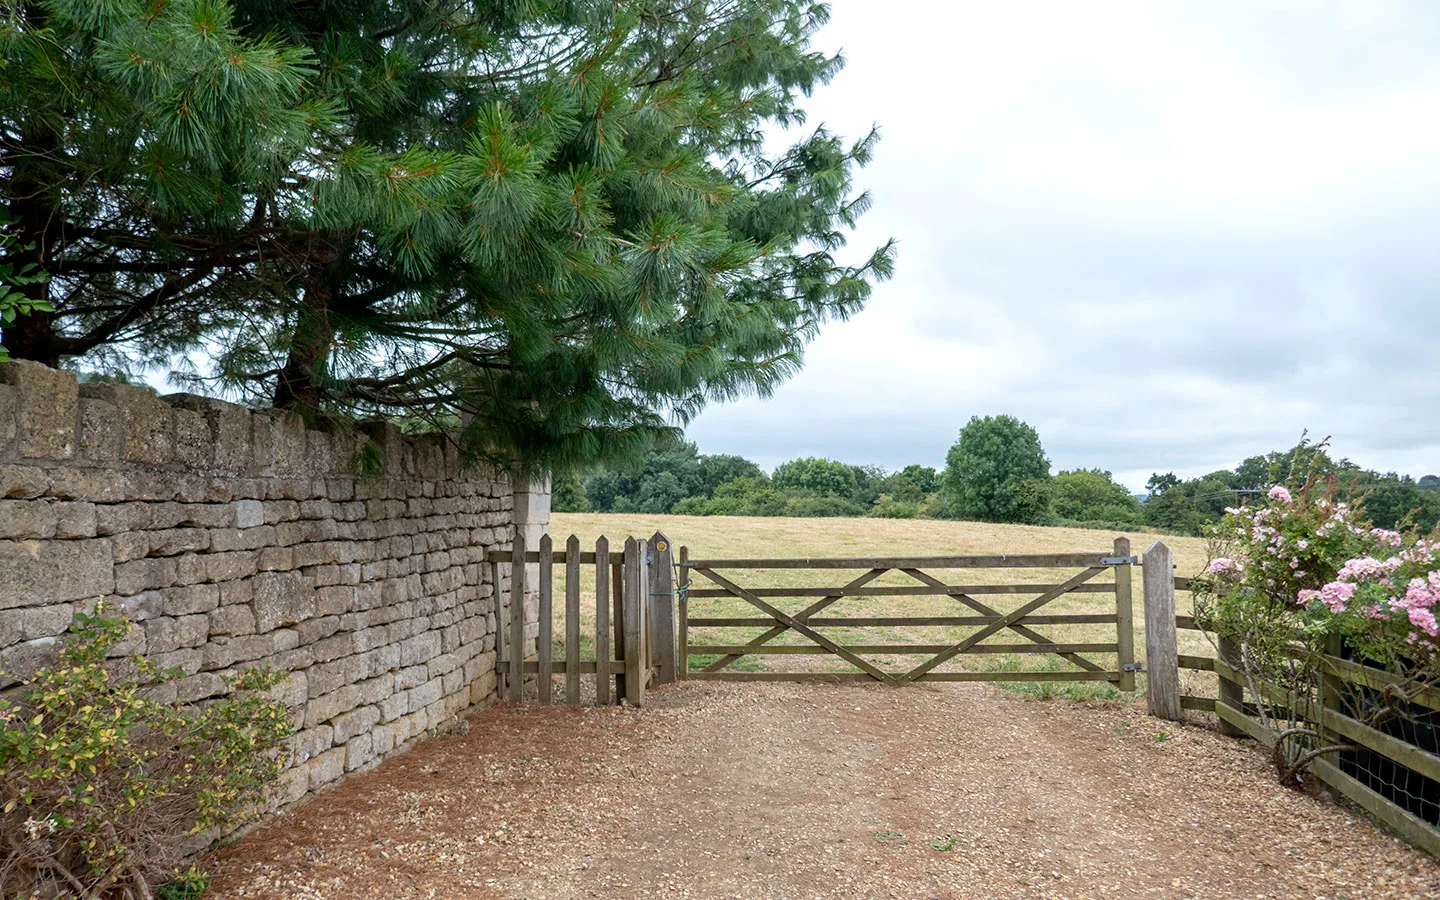 Gate on the Painswick to Slad walk in the Cotswolds